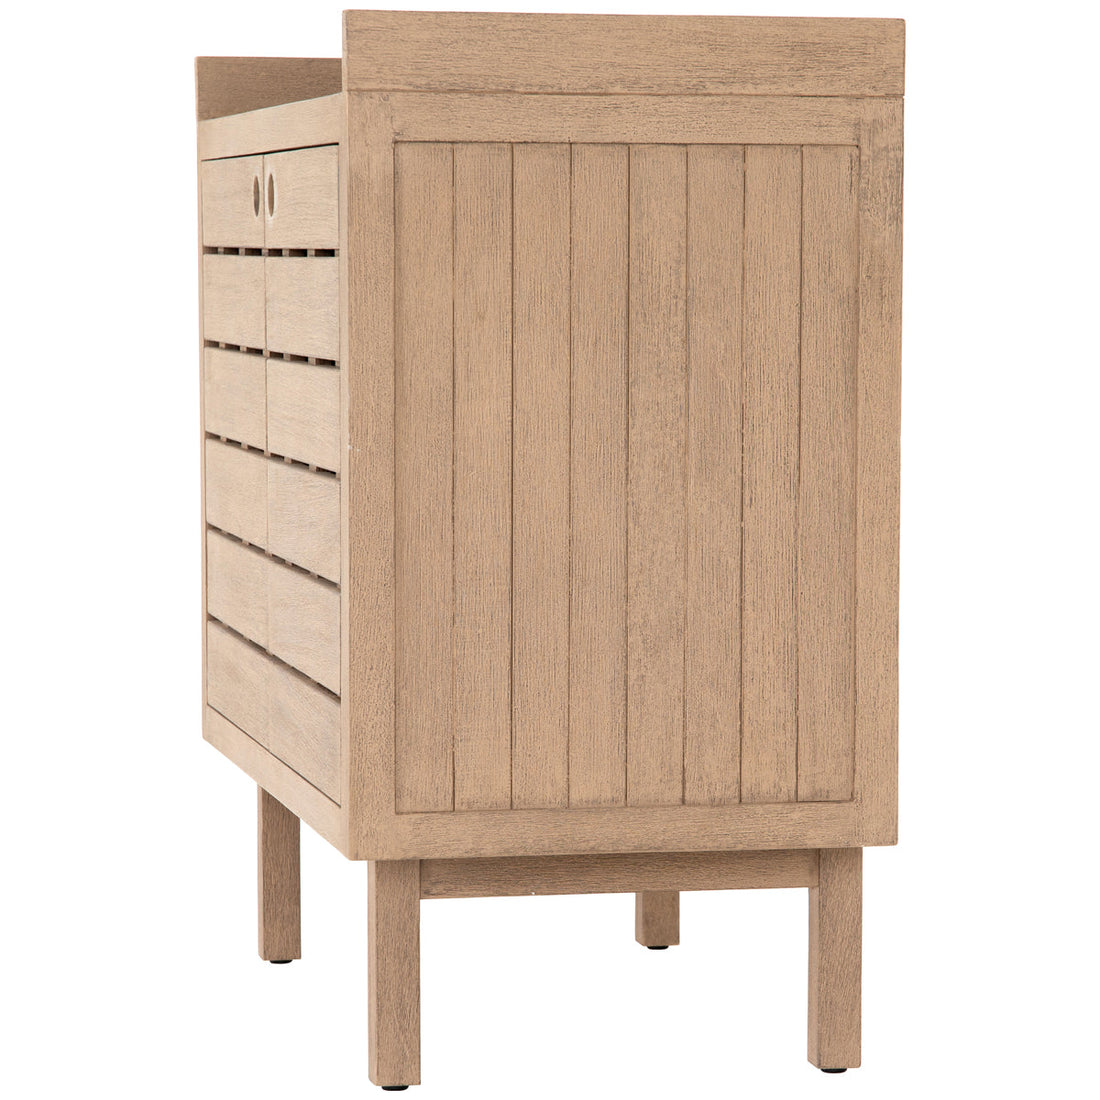 Four Hands Solano Lula Small Outdoor Sideboard - Washed Brown